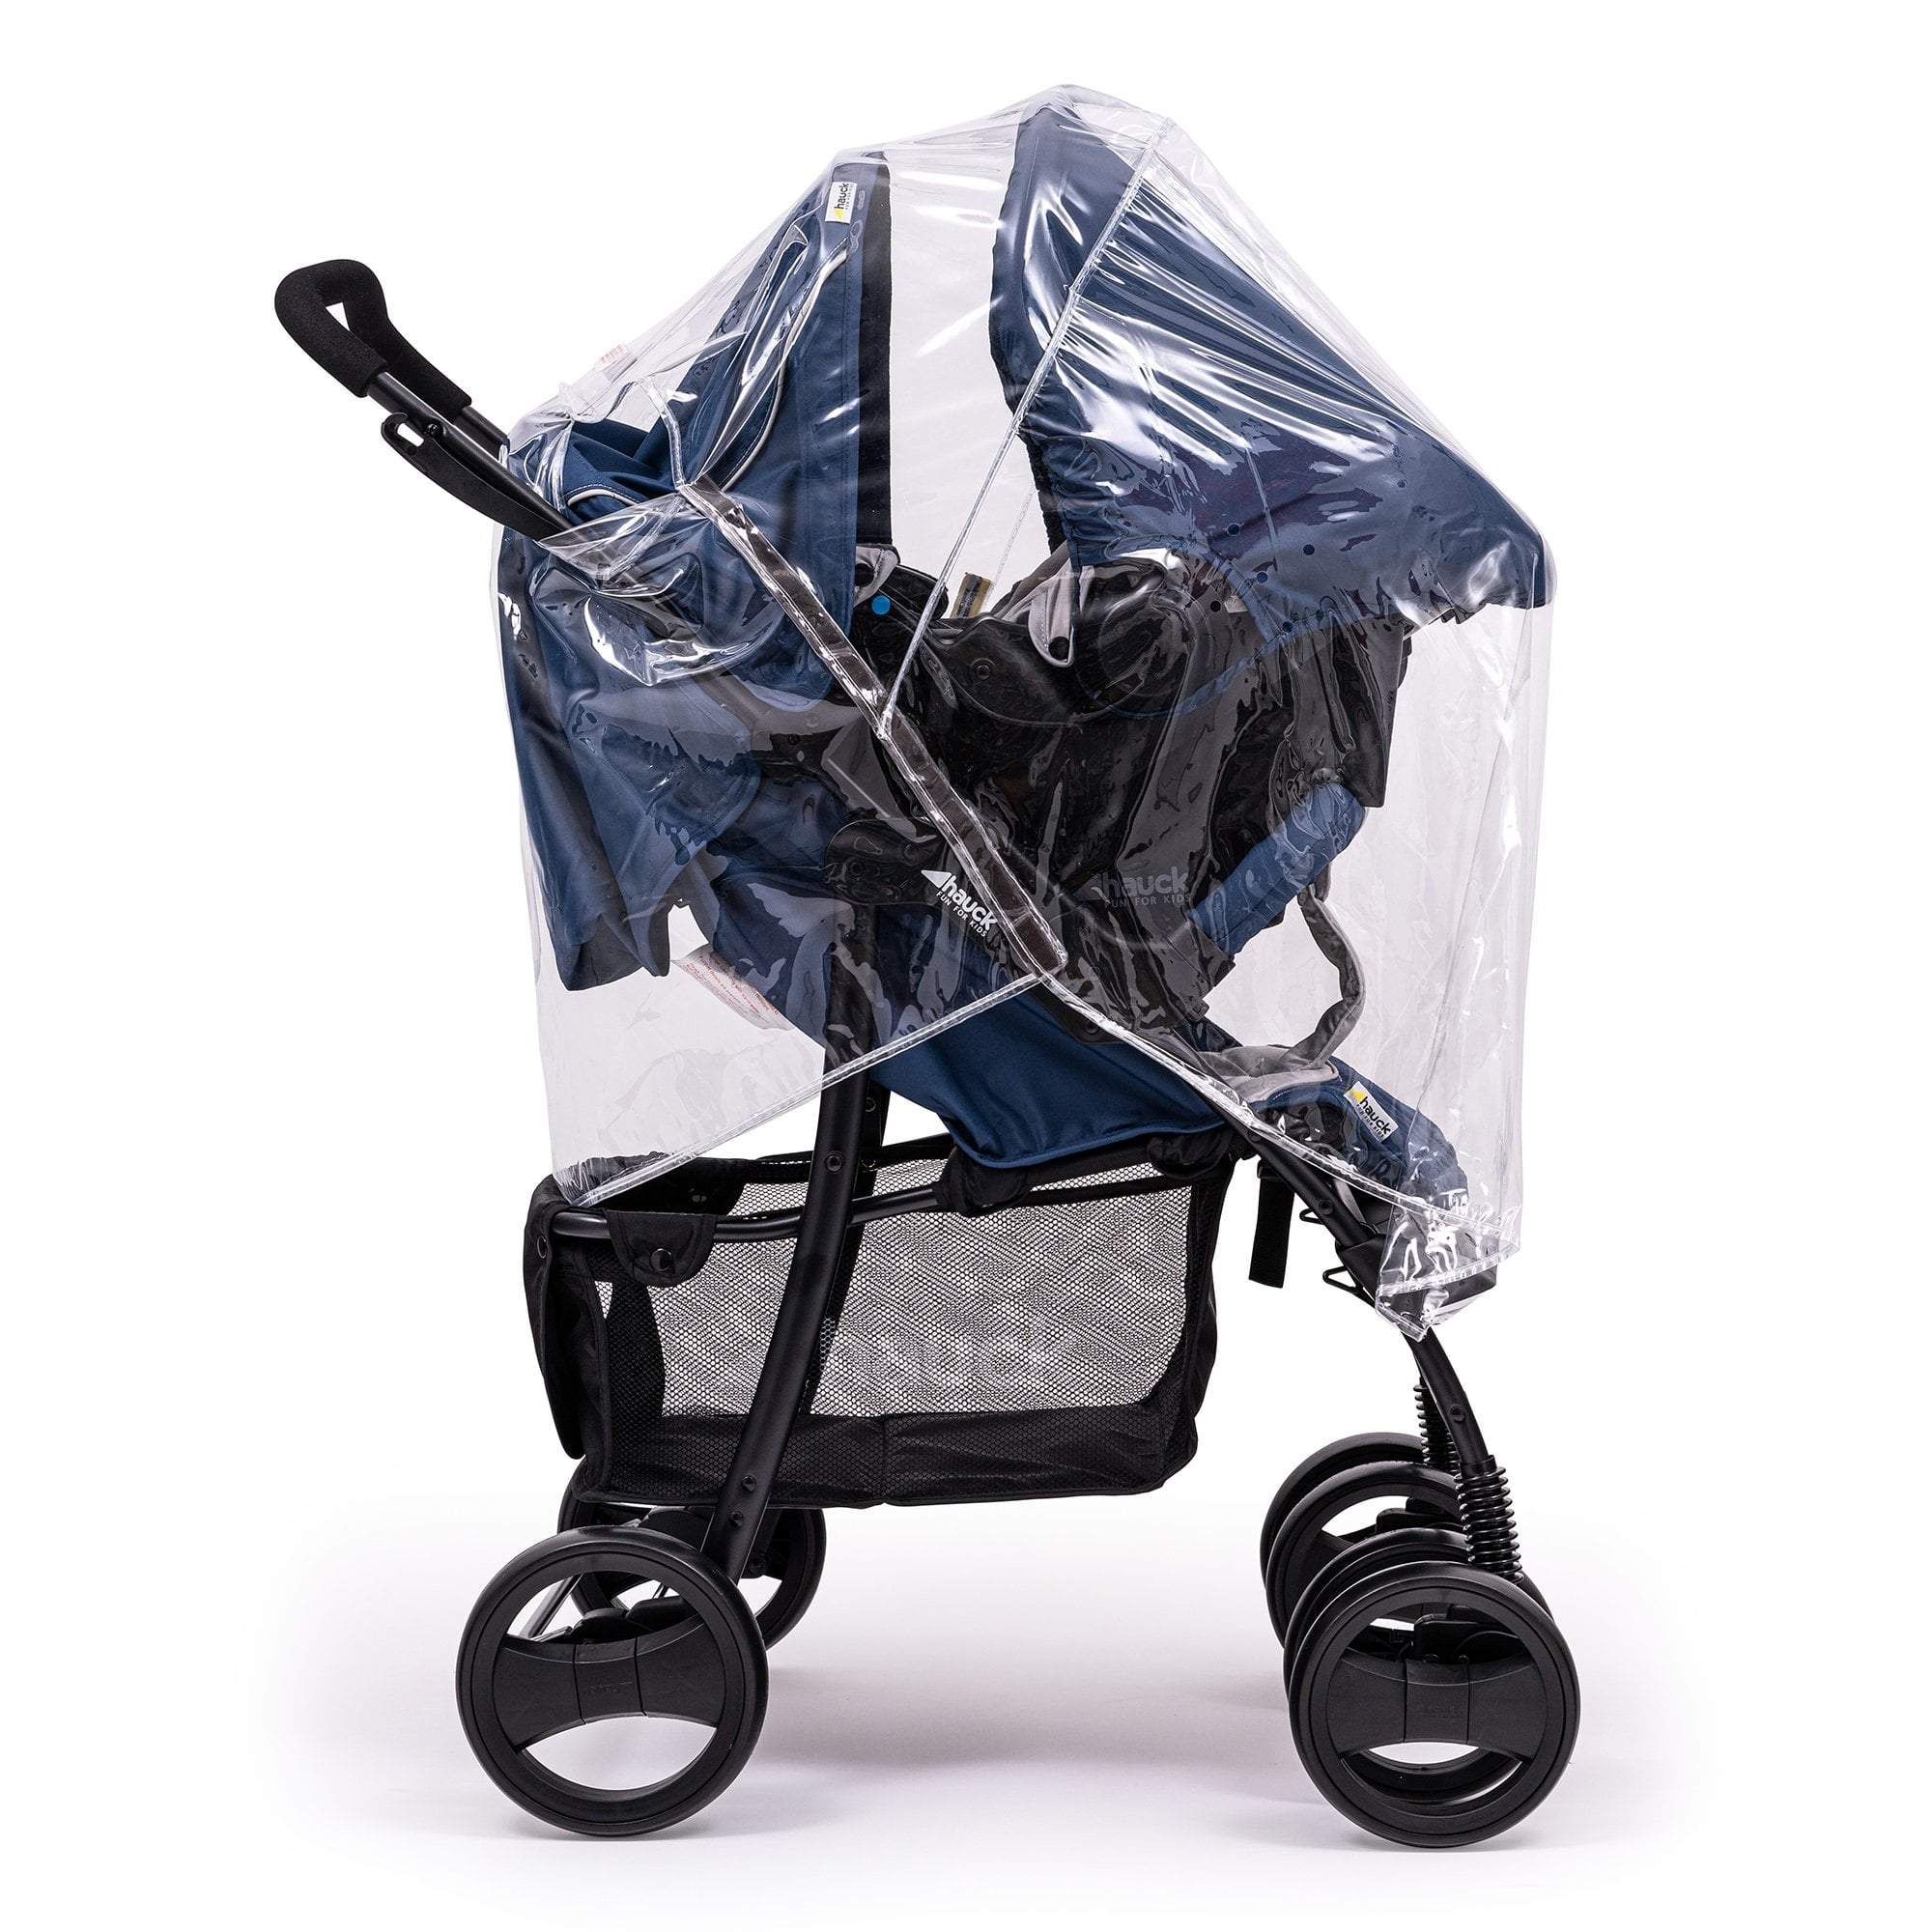 Travel System Raincover Compatible with TFK - Fits All Models - For Your Little One